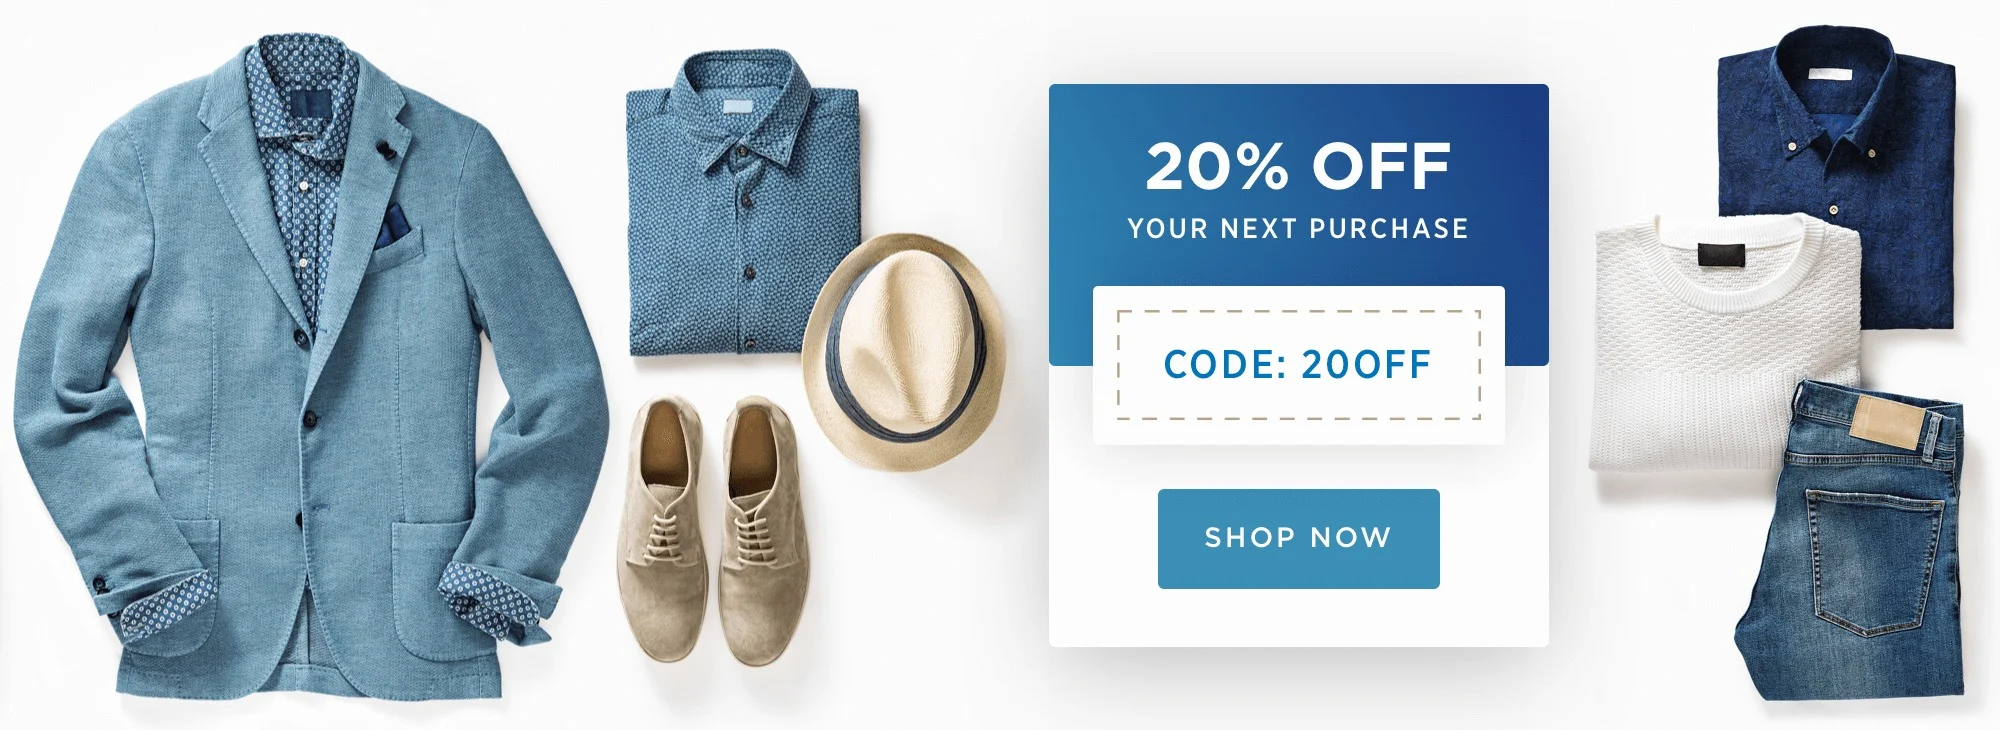 Coupon Marketing (Using Strategy to Boost Sales) | BigCommerce